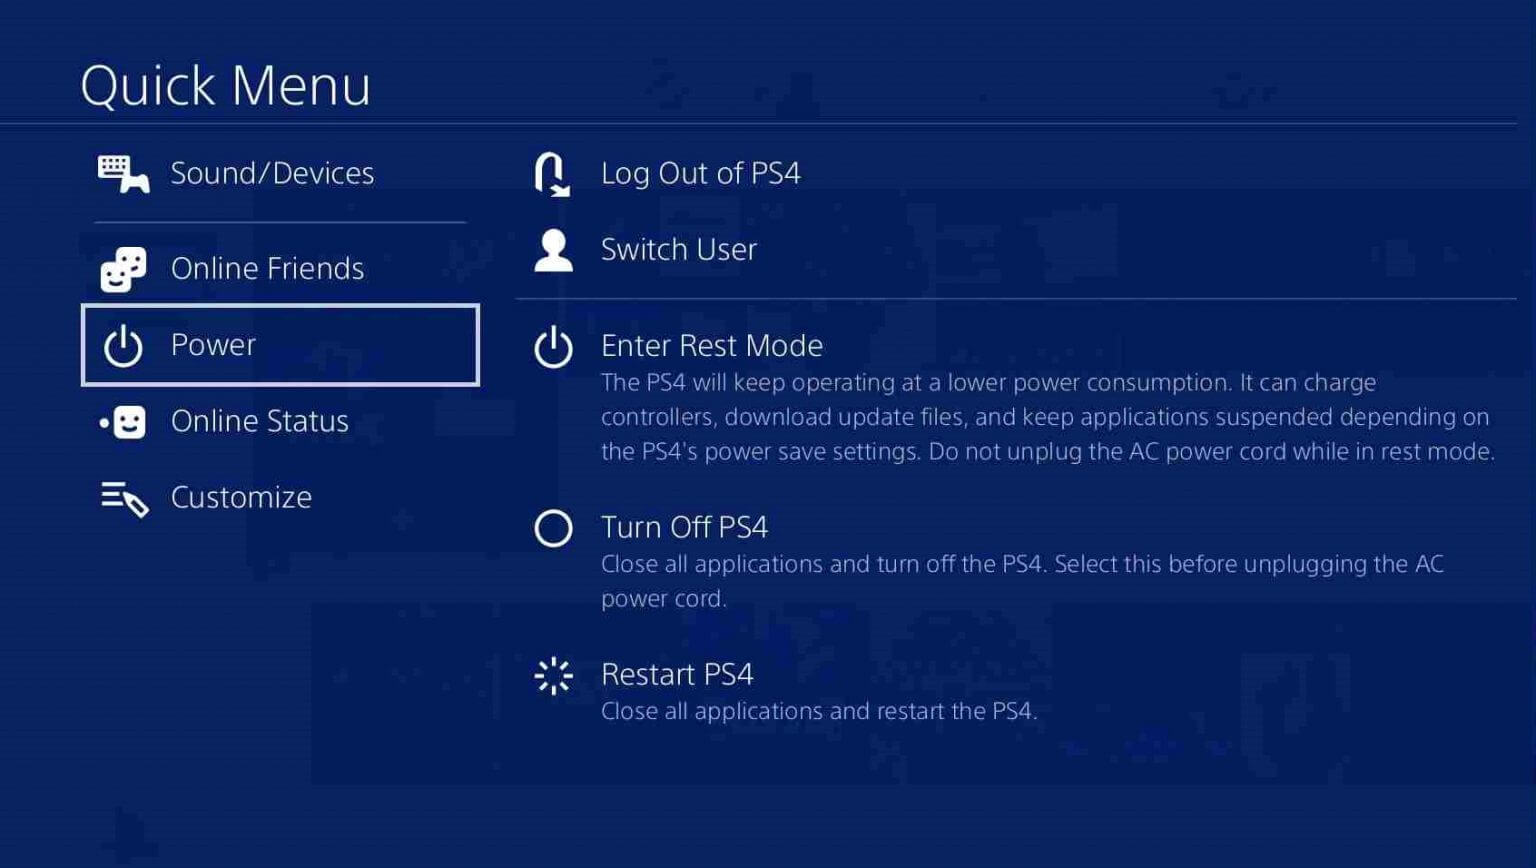 Select Turn Off PS4